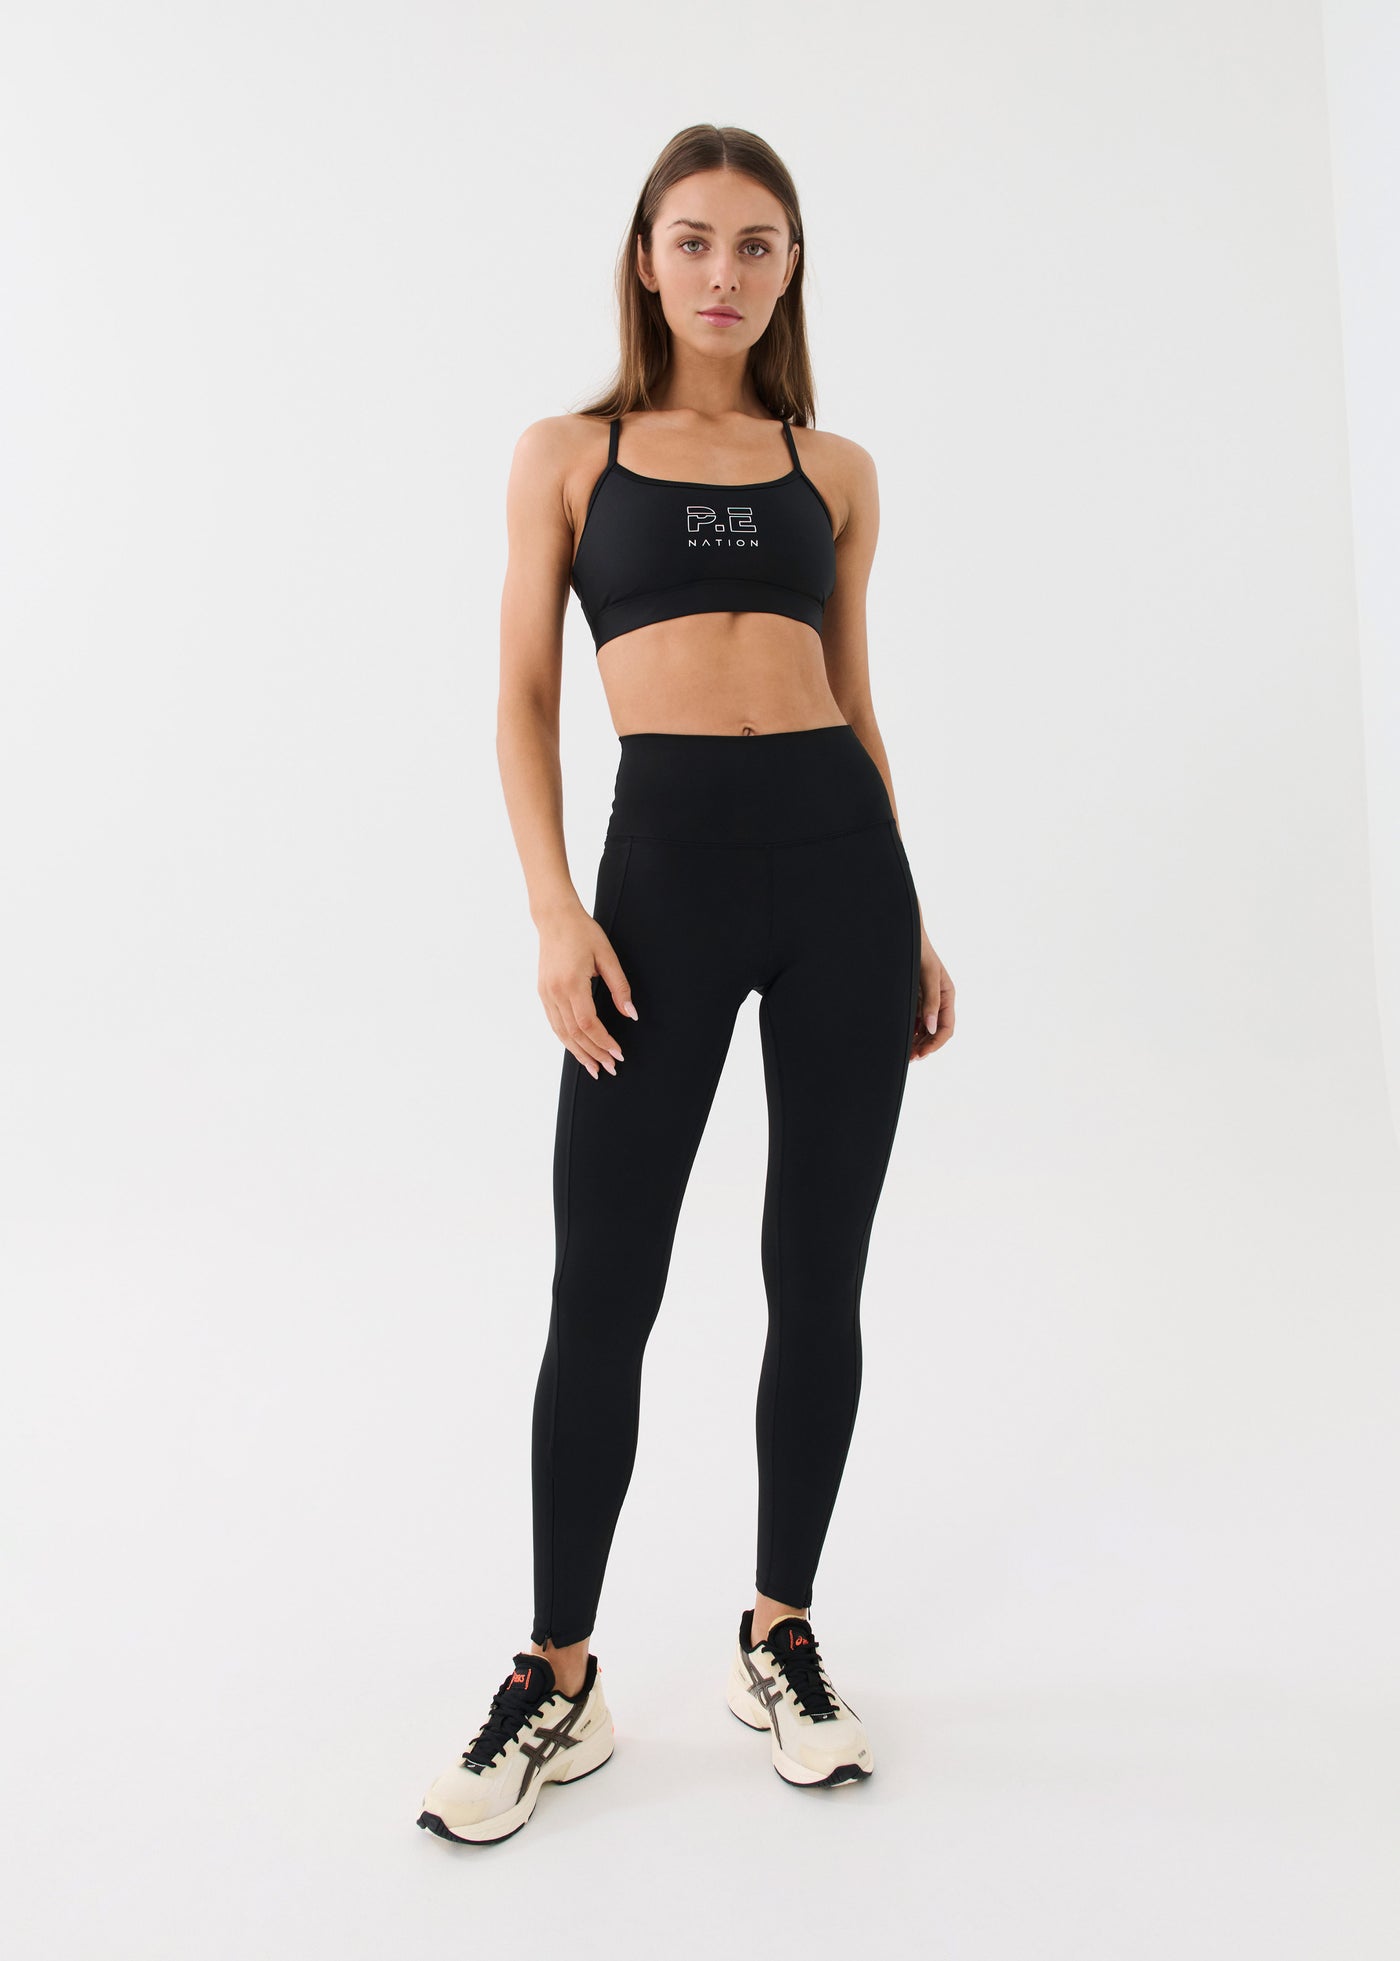 Another brand making Amplify leggings Anyone heard of